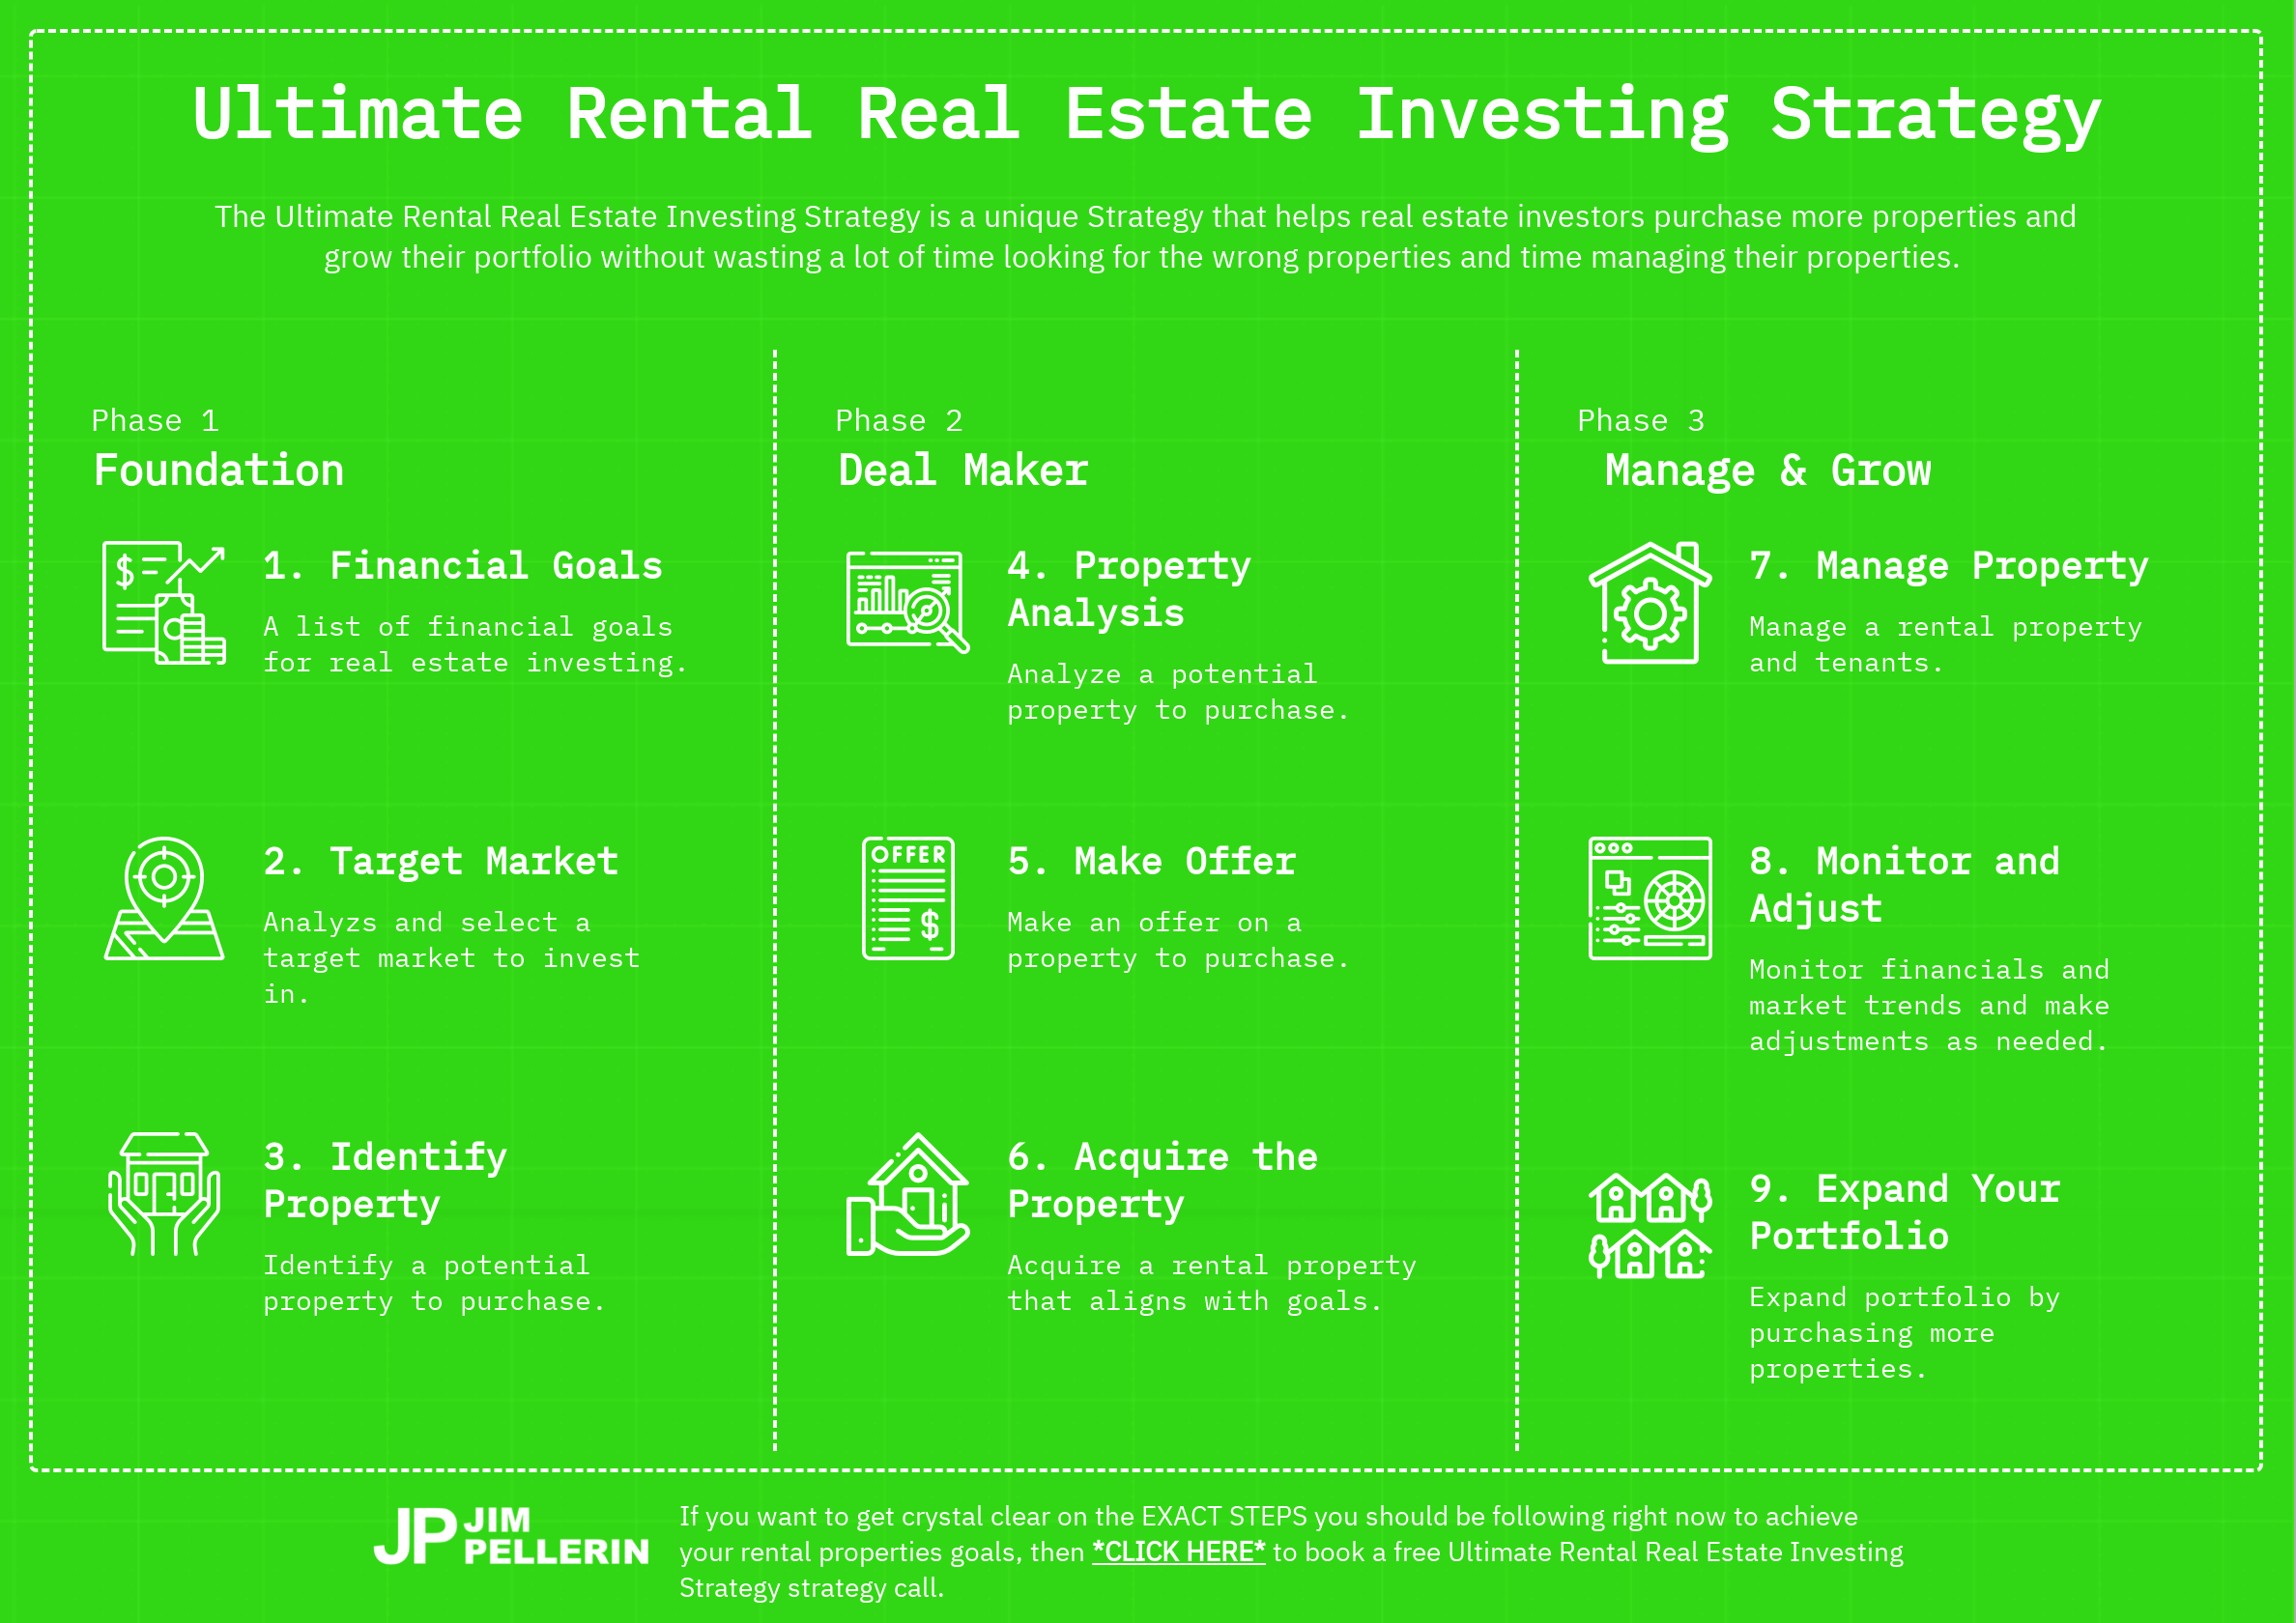 The Step-By-Step Guide to Rental Real Estate Investing